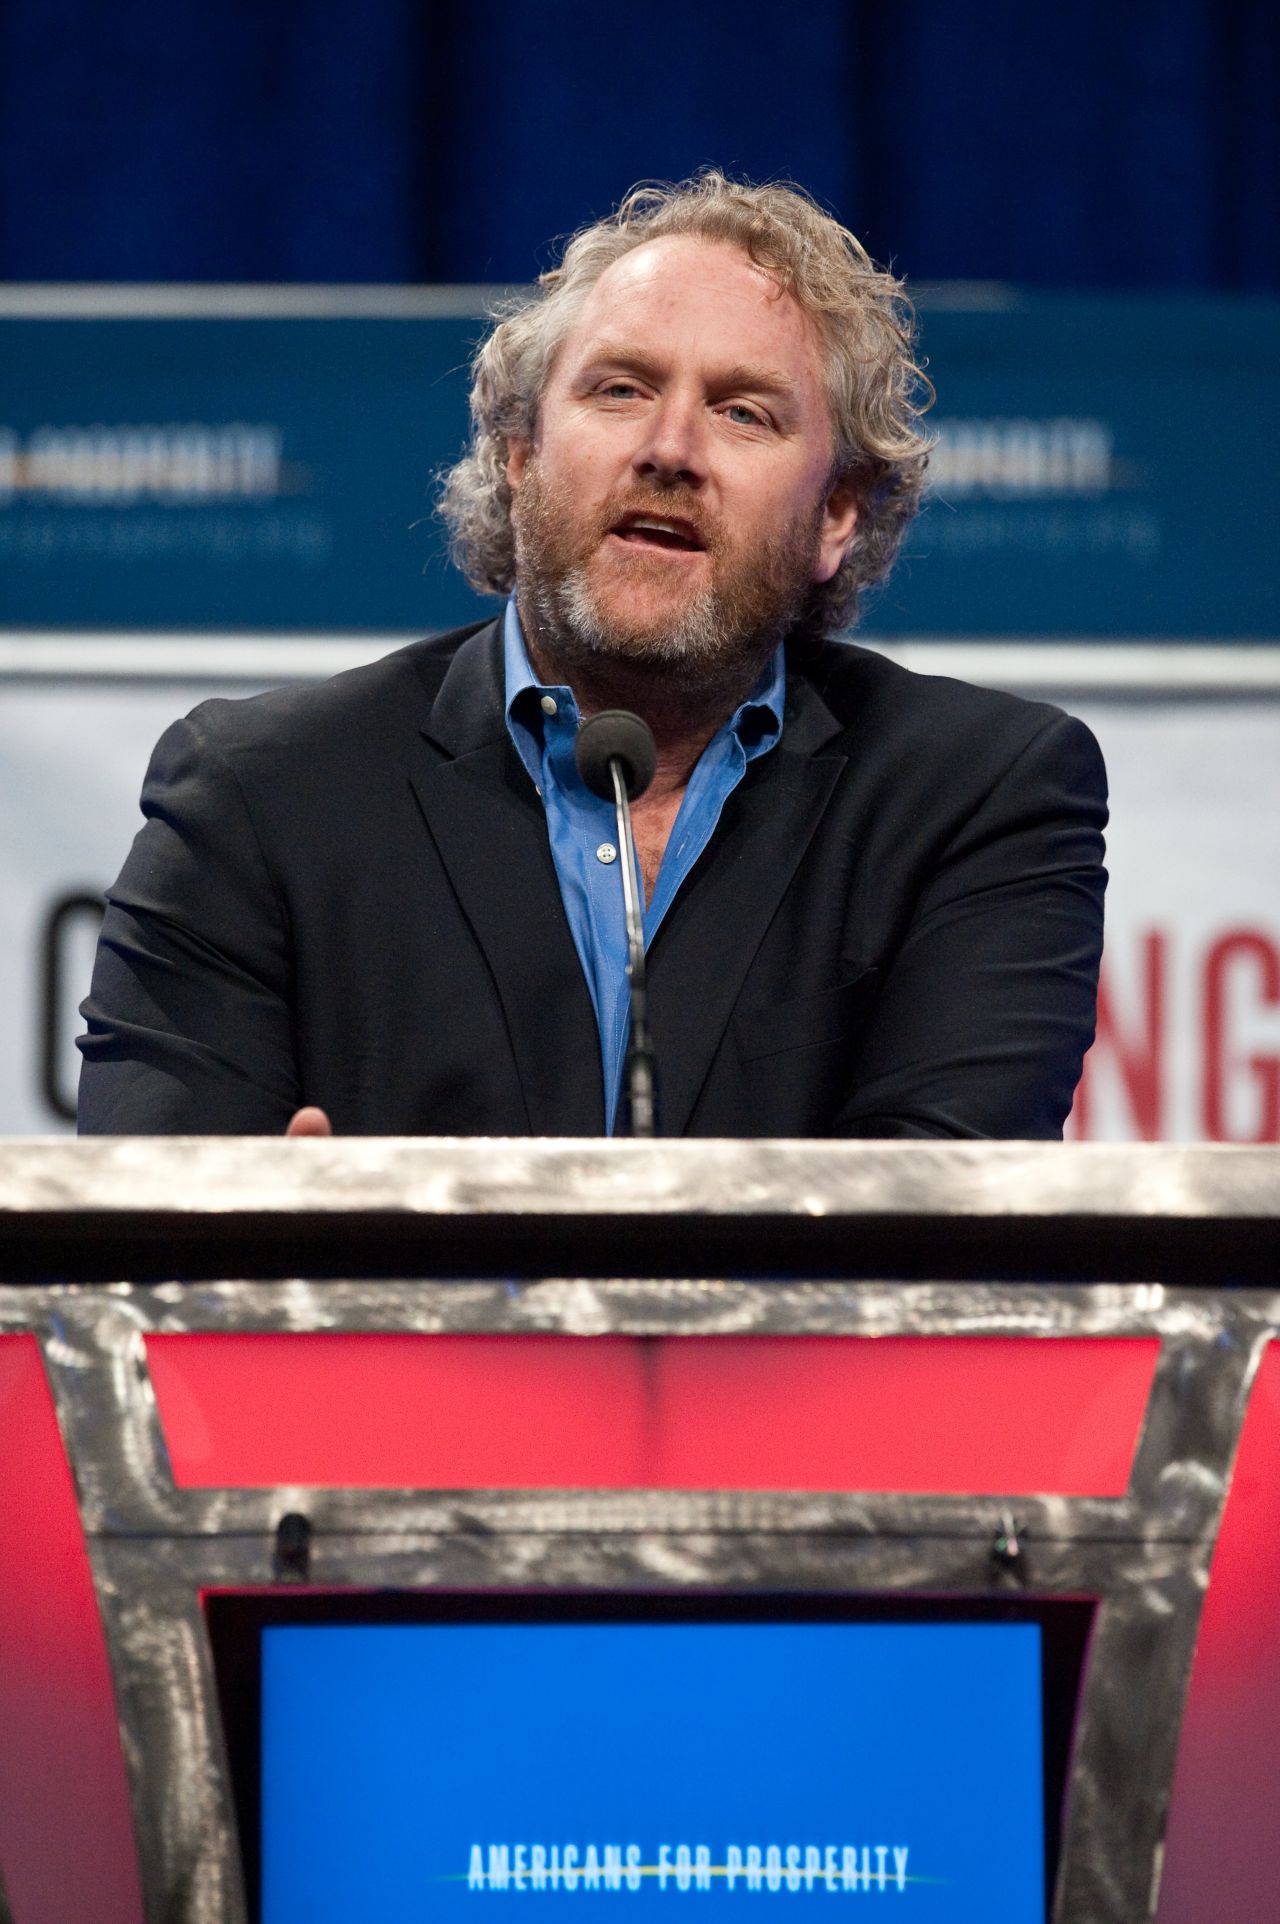 <a href="http://www.cnn.com/2012/03/01/politics/breitbart-obit/index.html" target="_blank">Andrew Breitbart</a>, editor and founder of the conservative blog BigGovernment.com, died at age 43 of natural causes on March 1. His posting of an explicit photo U.S. Rep. Anthony Weiner sent to Twitter followers led to Weiner's downfall.